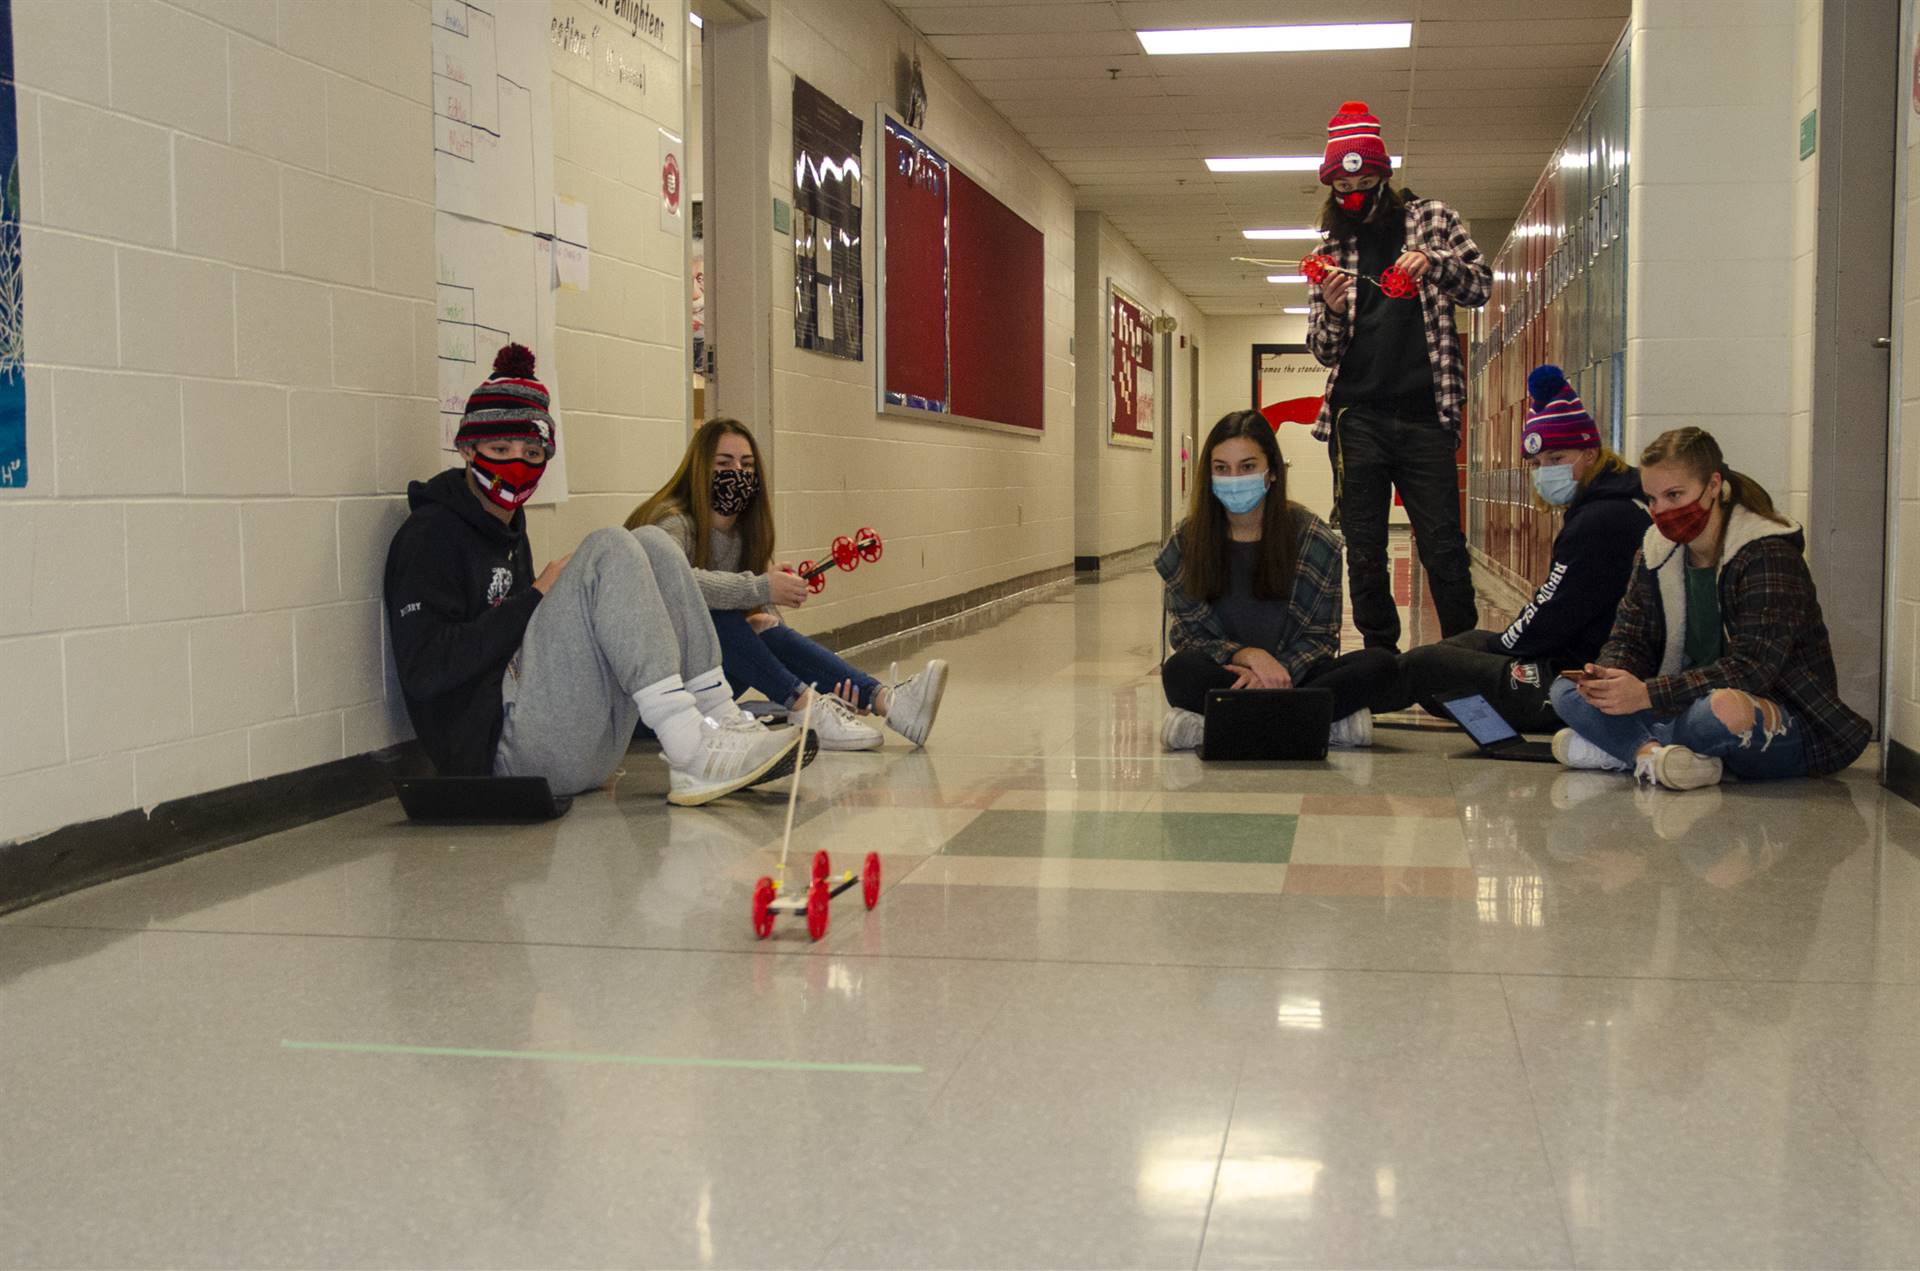 Physics doing time tests with their mouse trap cars